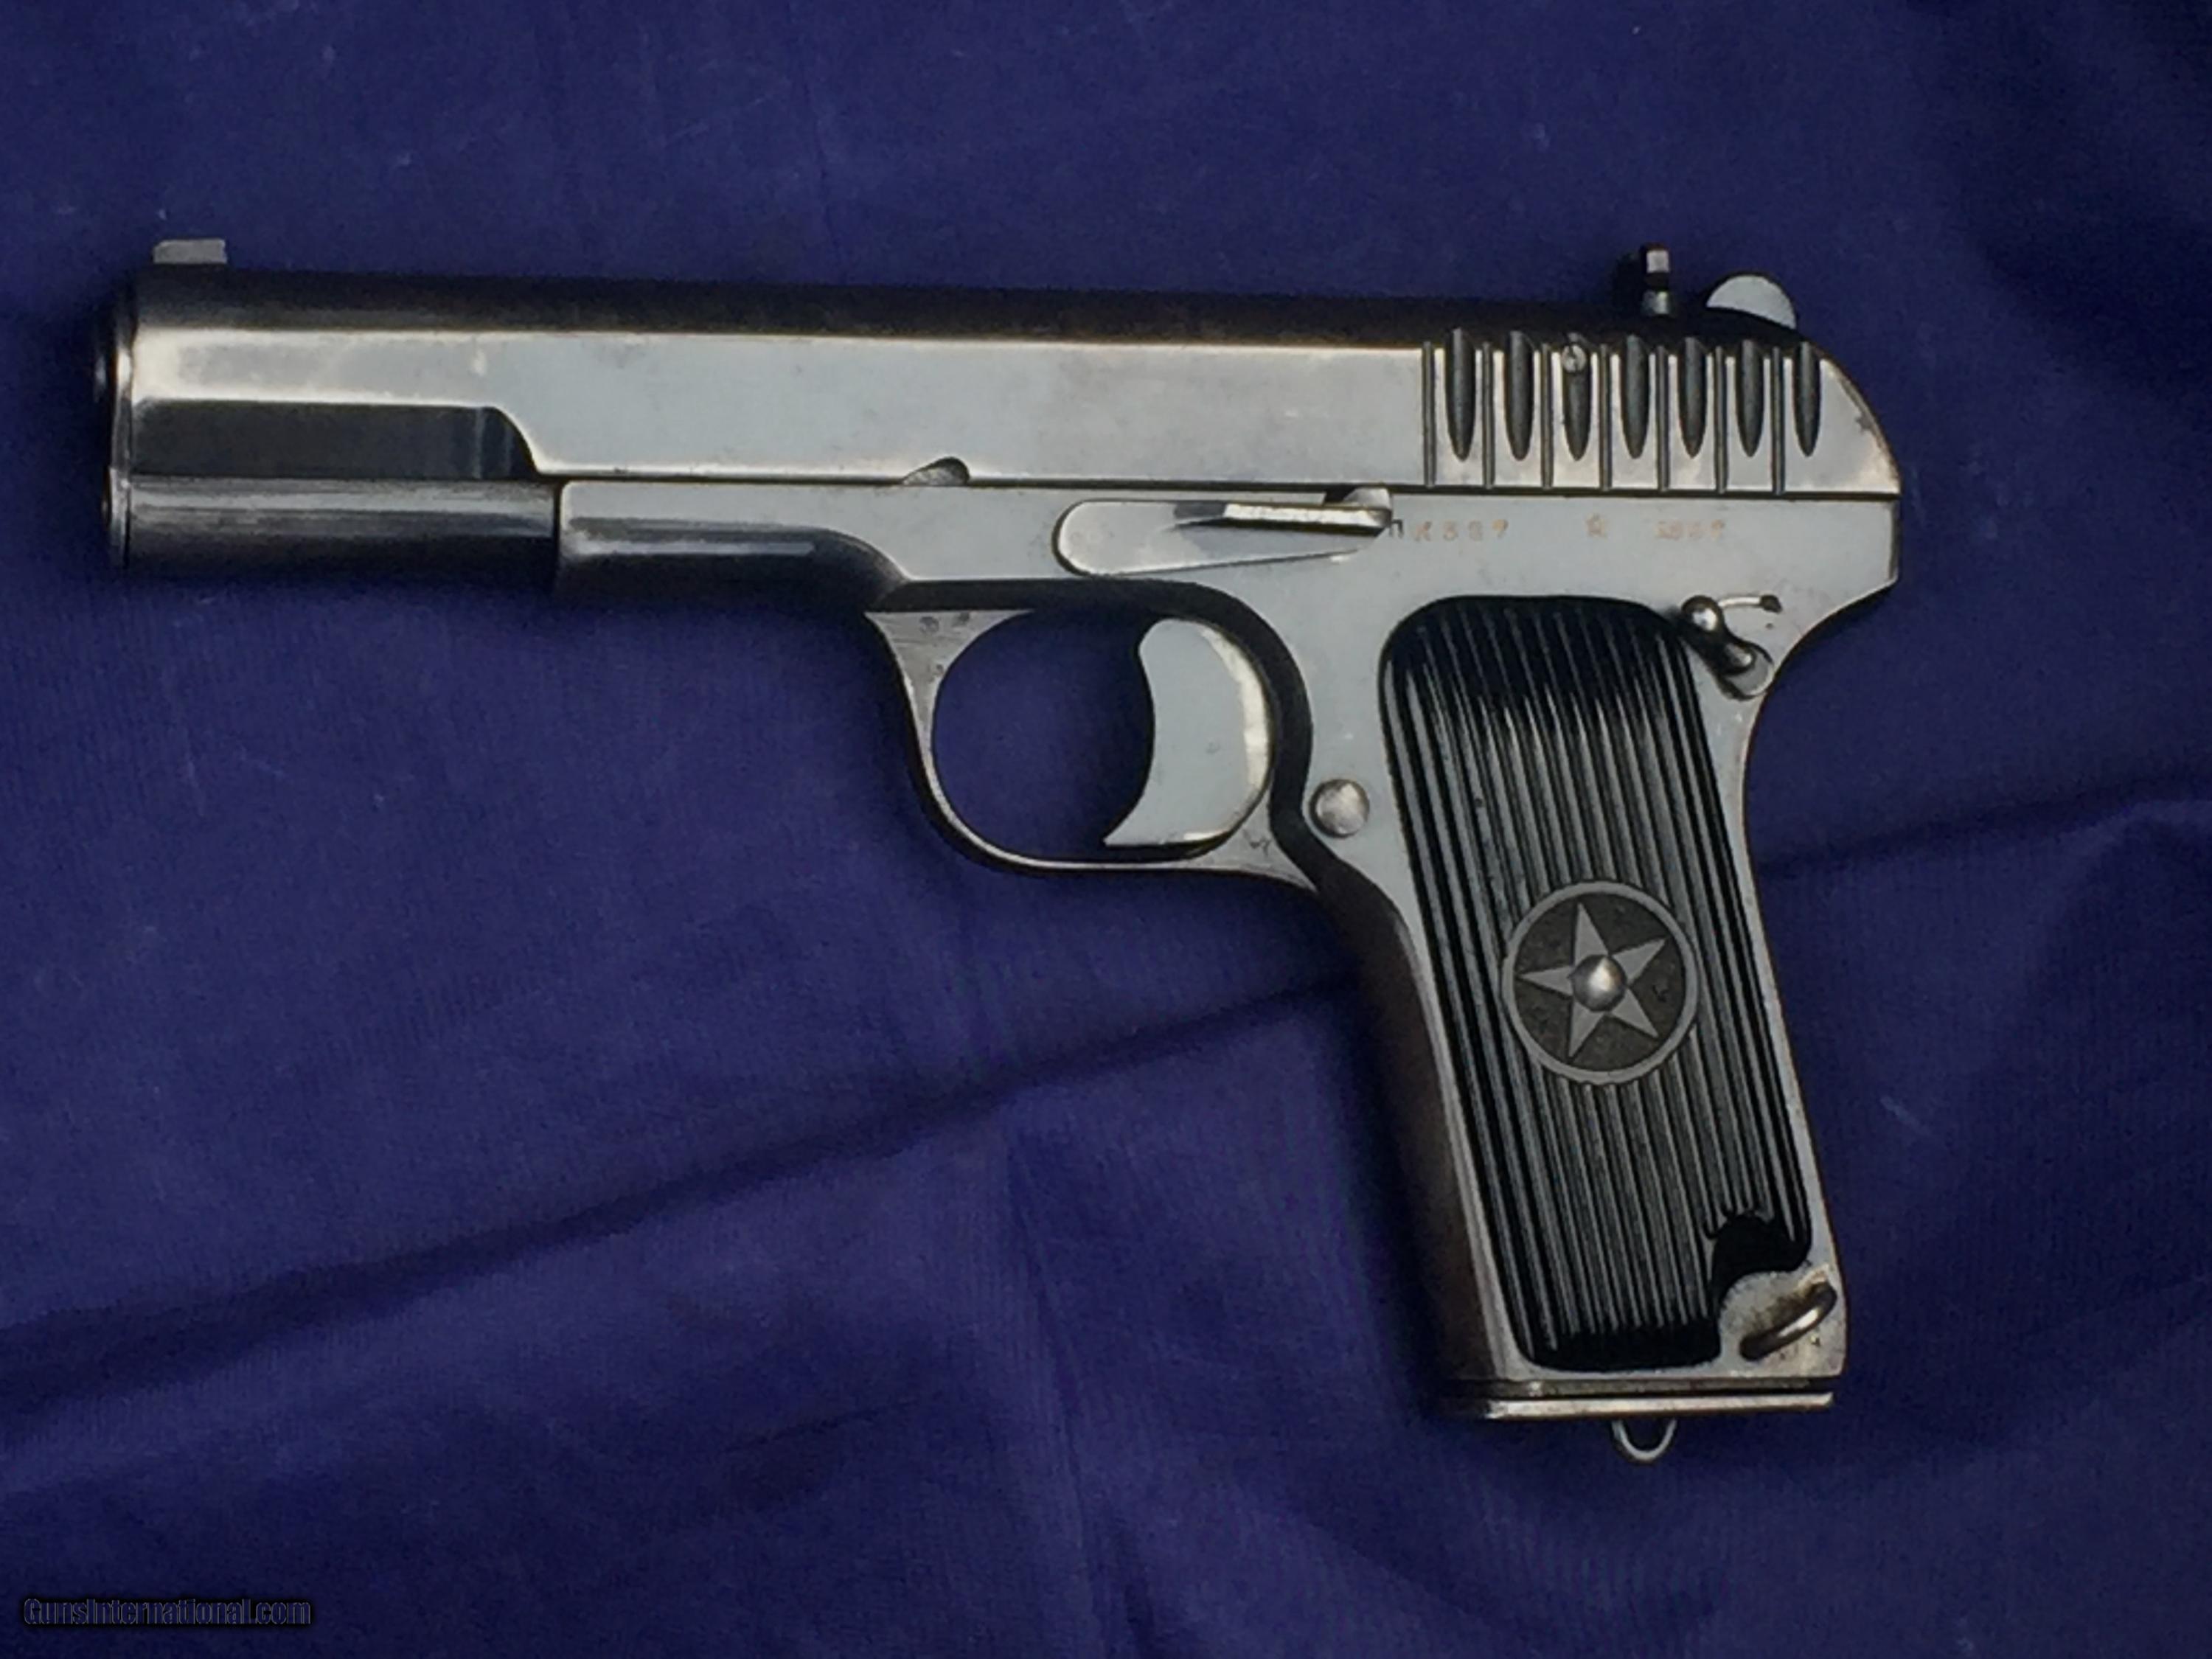 Russian Pre-WWII Tokarev TT-33 made in 1938 was featured in